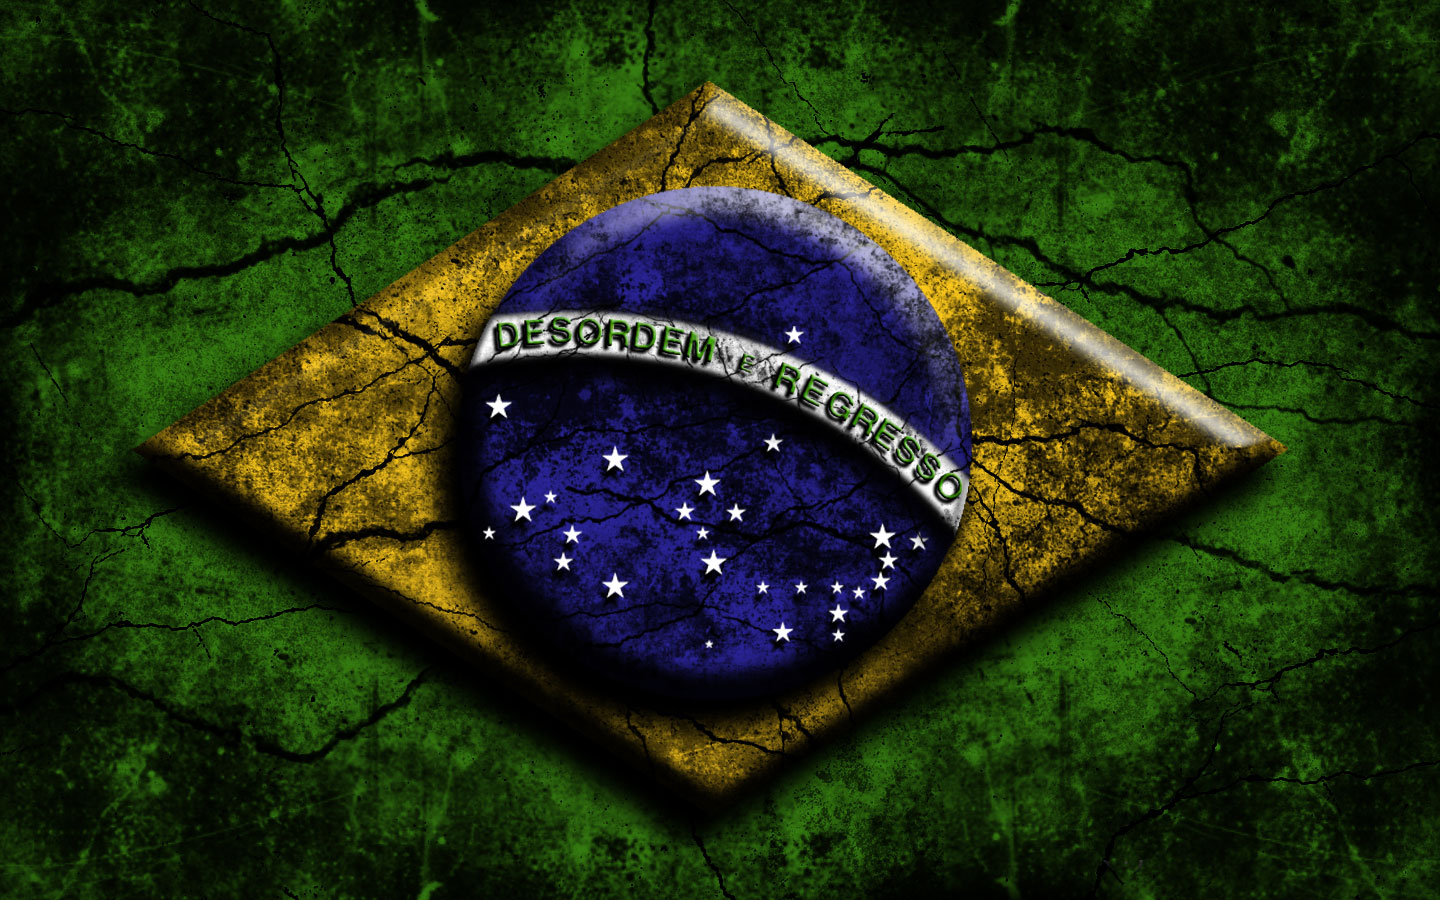 Download wallpapers 4k, Flag of Brazil, geometric art, South American  countries, Brazilian flag, creative, Brazil, South America, Brazil 3D flag,  national symbols for desktop free. Pictures for desktop free